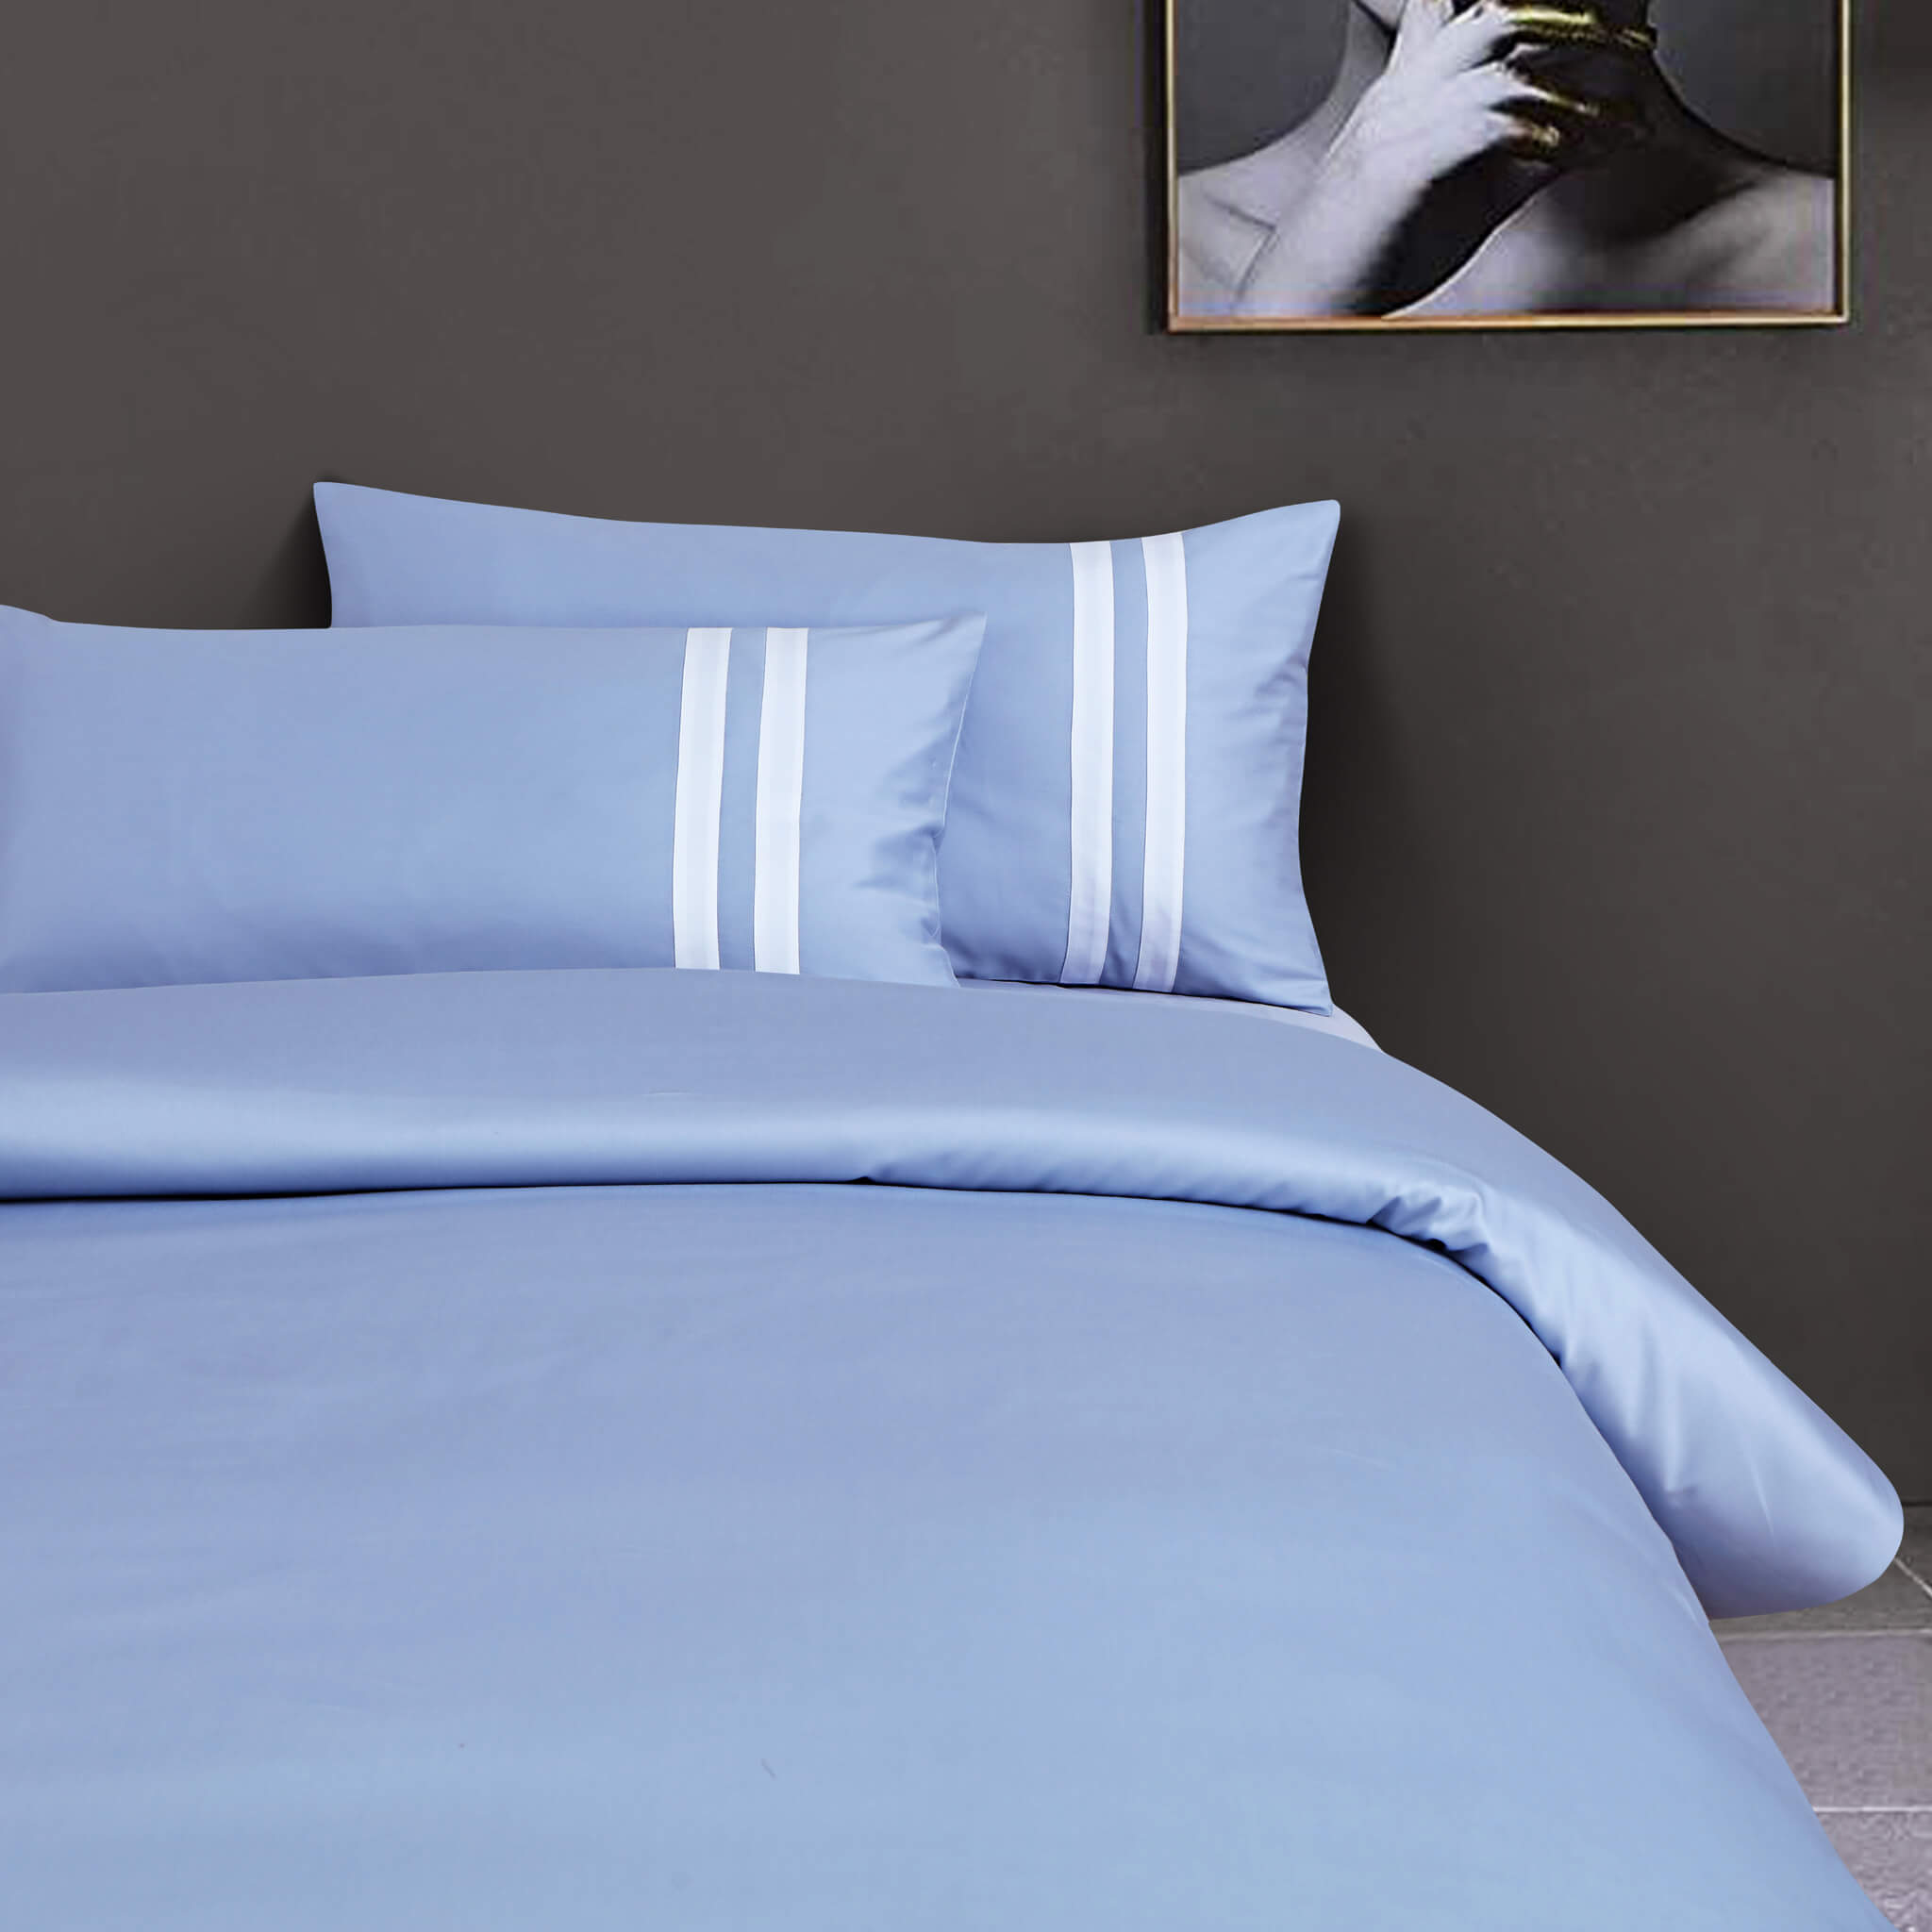 Malako Vivid Striped Solid Pigeon Blue 500 TC King Size 100% Cotton Bed Sheet With 2 Plain Pillow Covers with Stripes - MALAKO